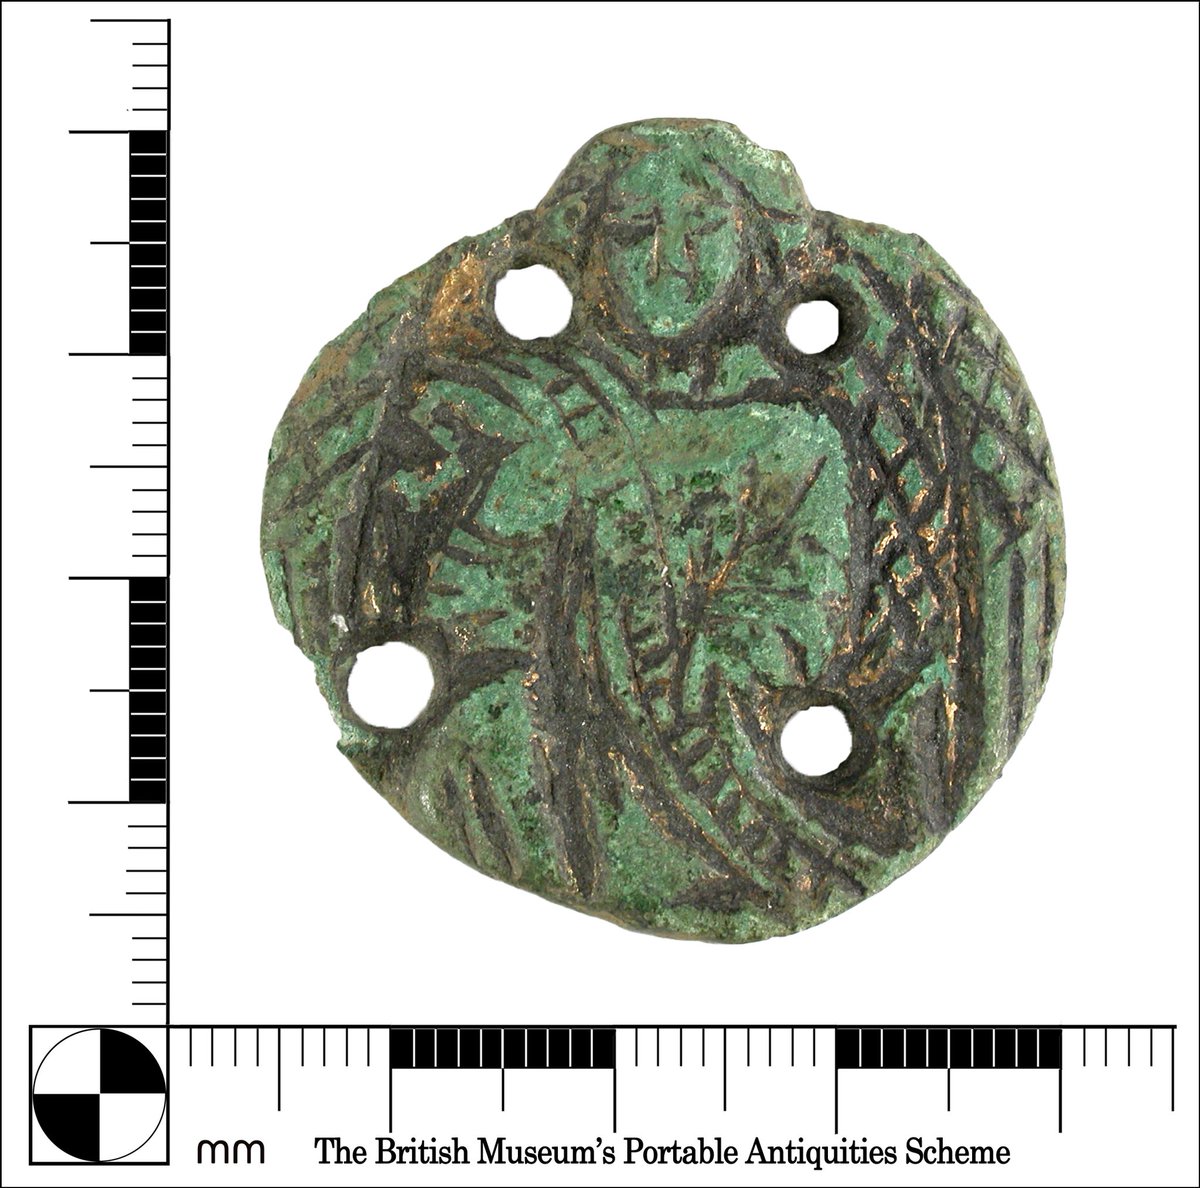 It’s time for another #FindsFriday...

This week’s choice is a Medieval gilded mount thought to depict the Angel Gabriel. What a lovely find!

See record CORN-7D1082 for details:

finds.org.uk/database/artef…

#PortableAntiquitiesScheme #RecordYourFinds #Archaeology #Cornwall